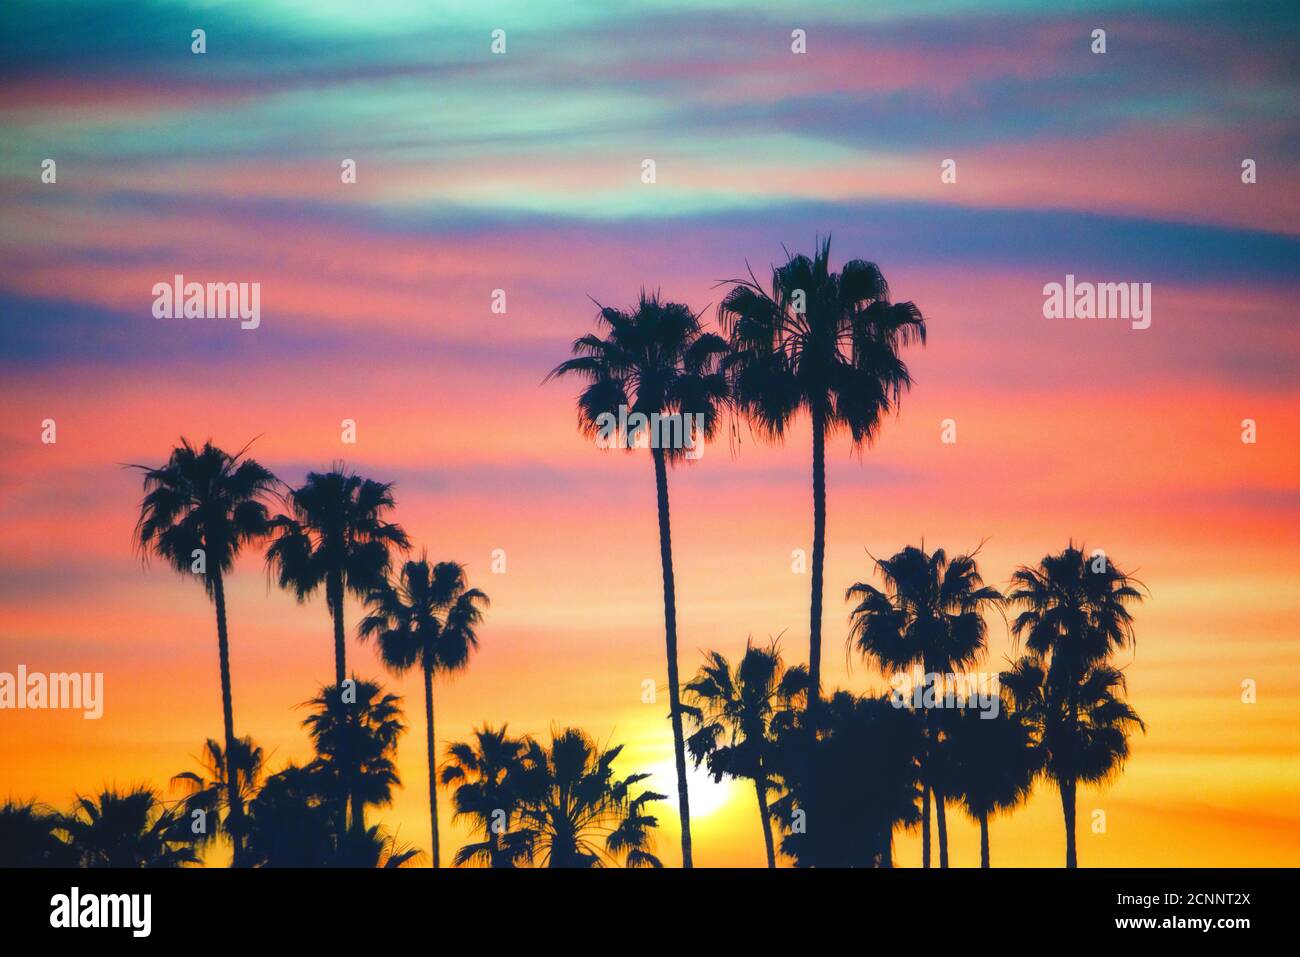 Silhouette of palm trees against sunset sky, California, USA Stock Photo